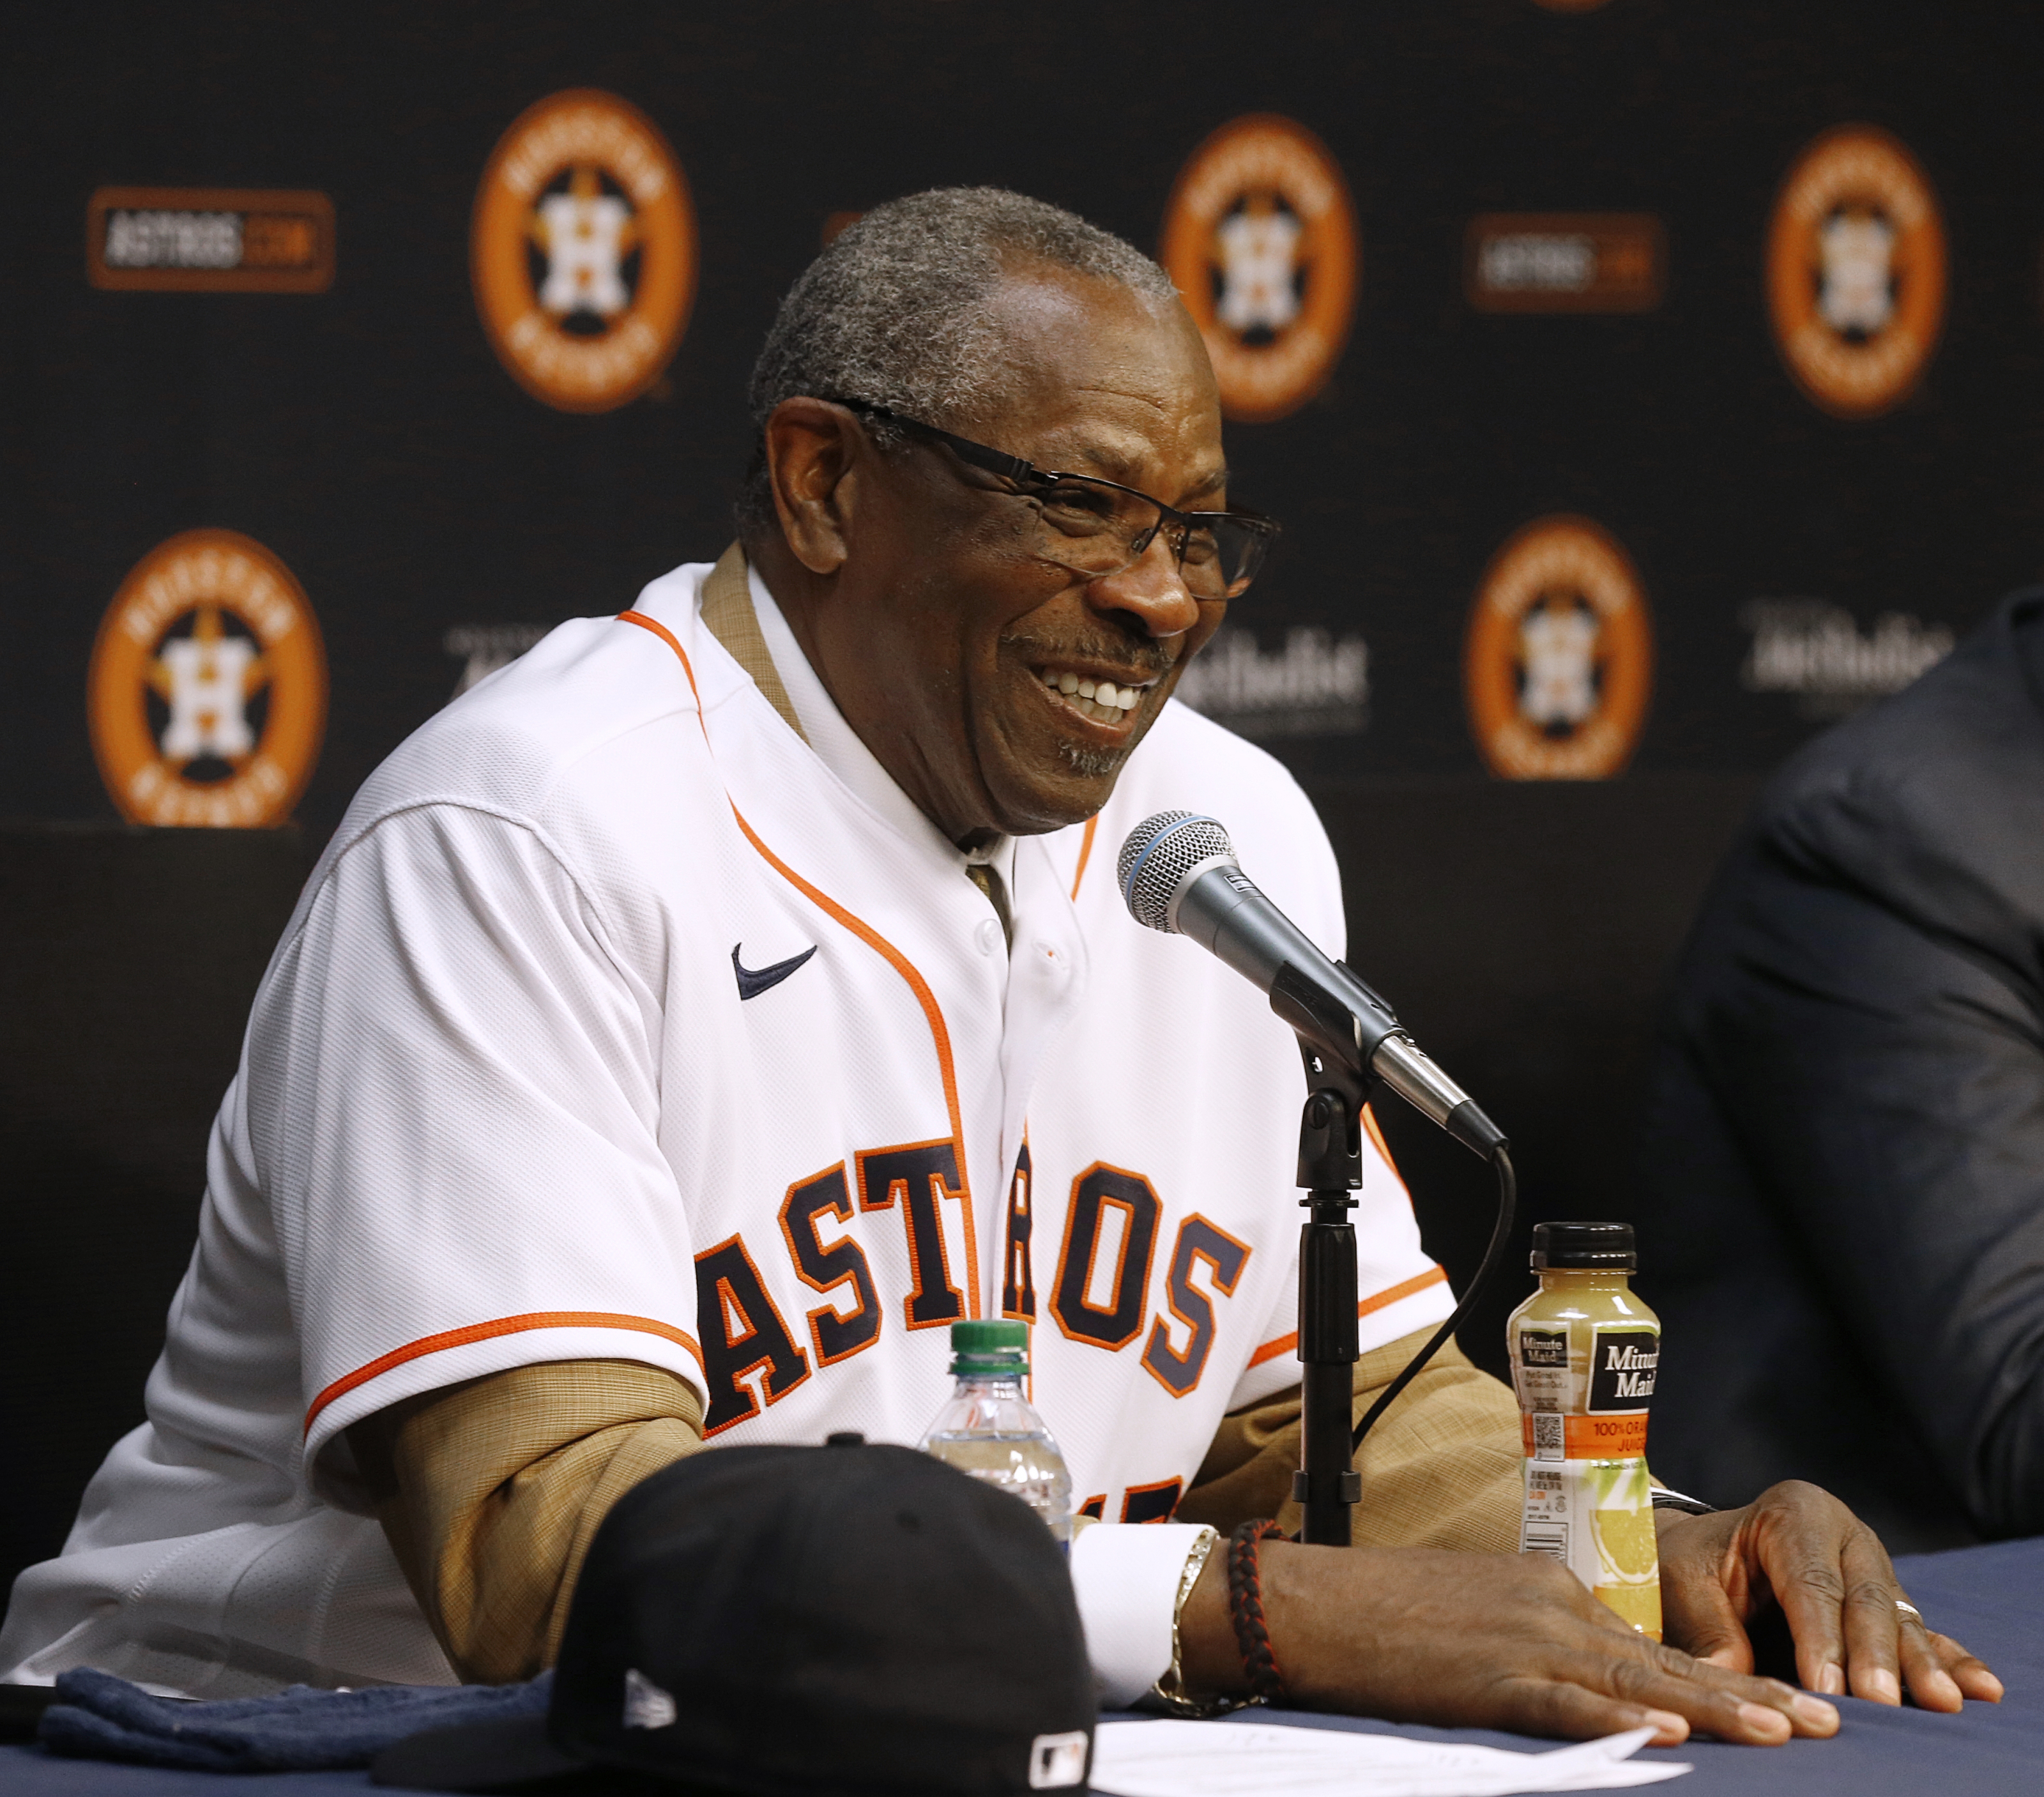 Washington Nationals hire Dusty Baker as their next manager - The